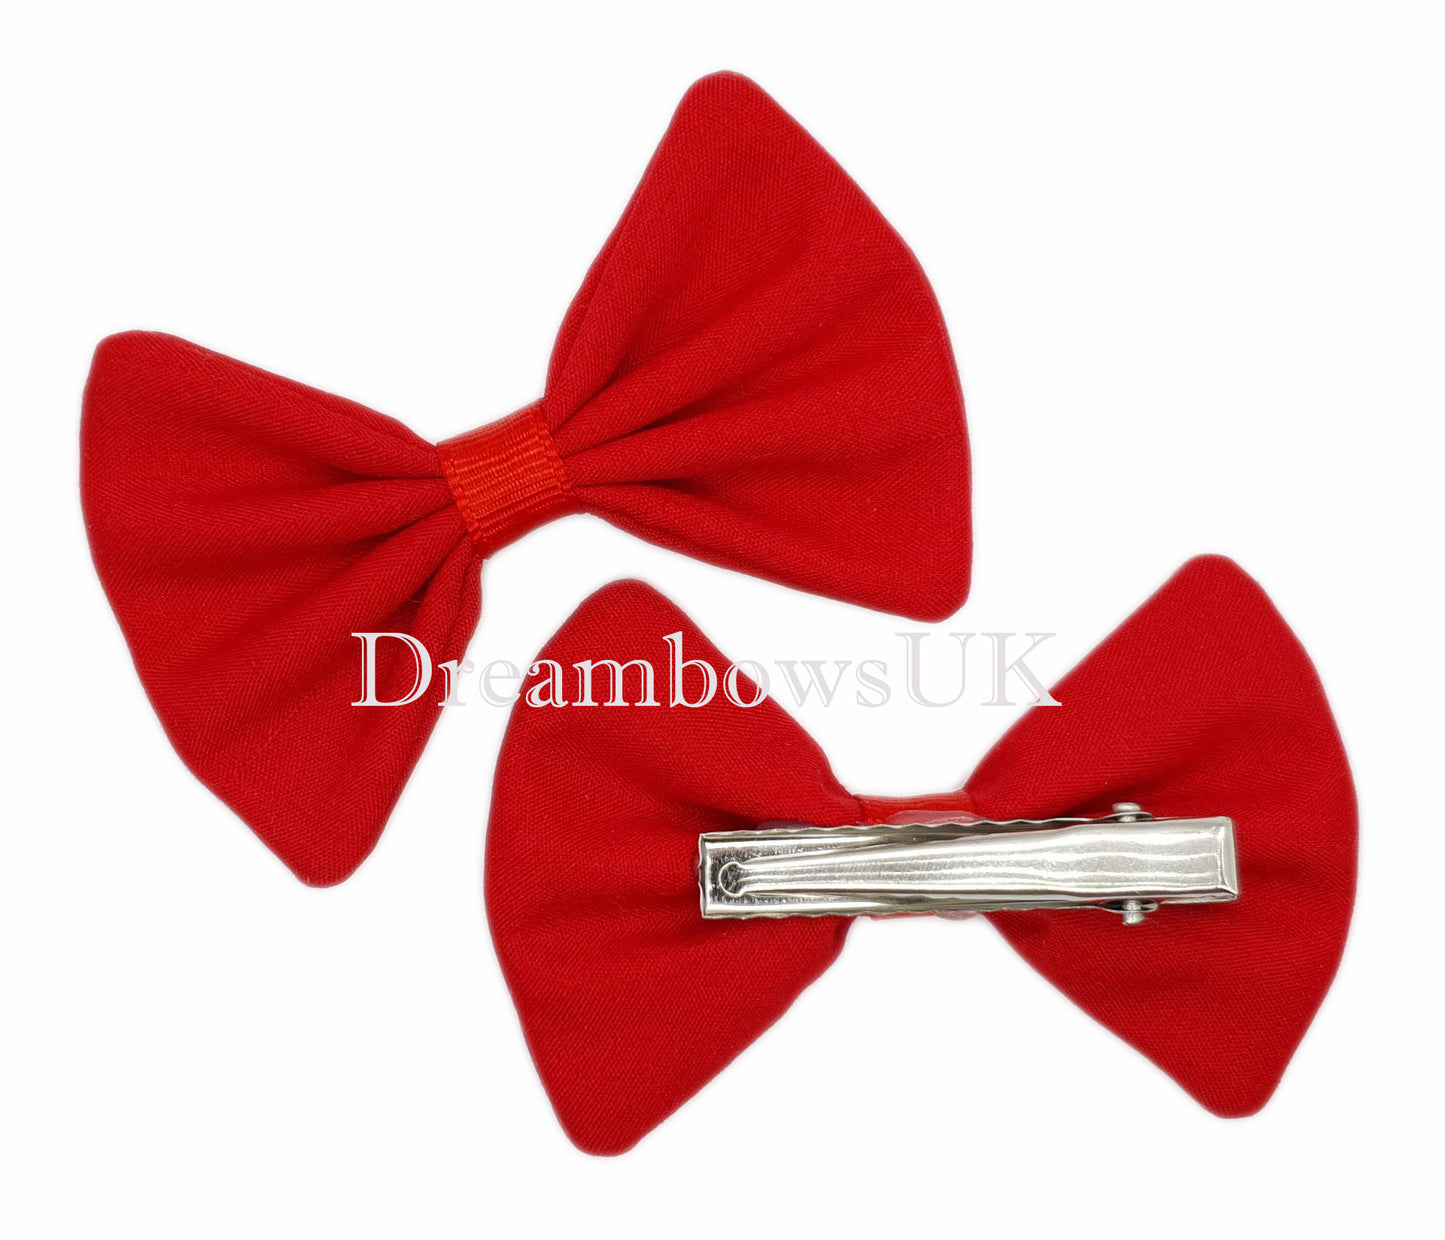 Girls red school bows on alligator clips